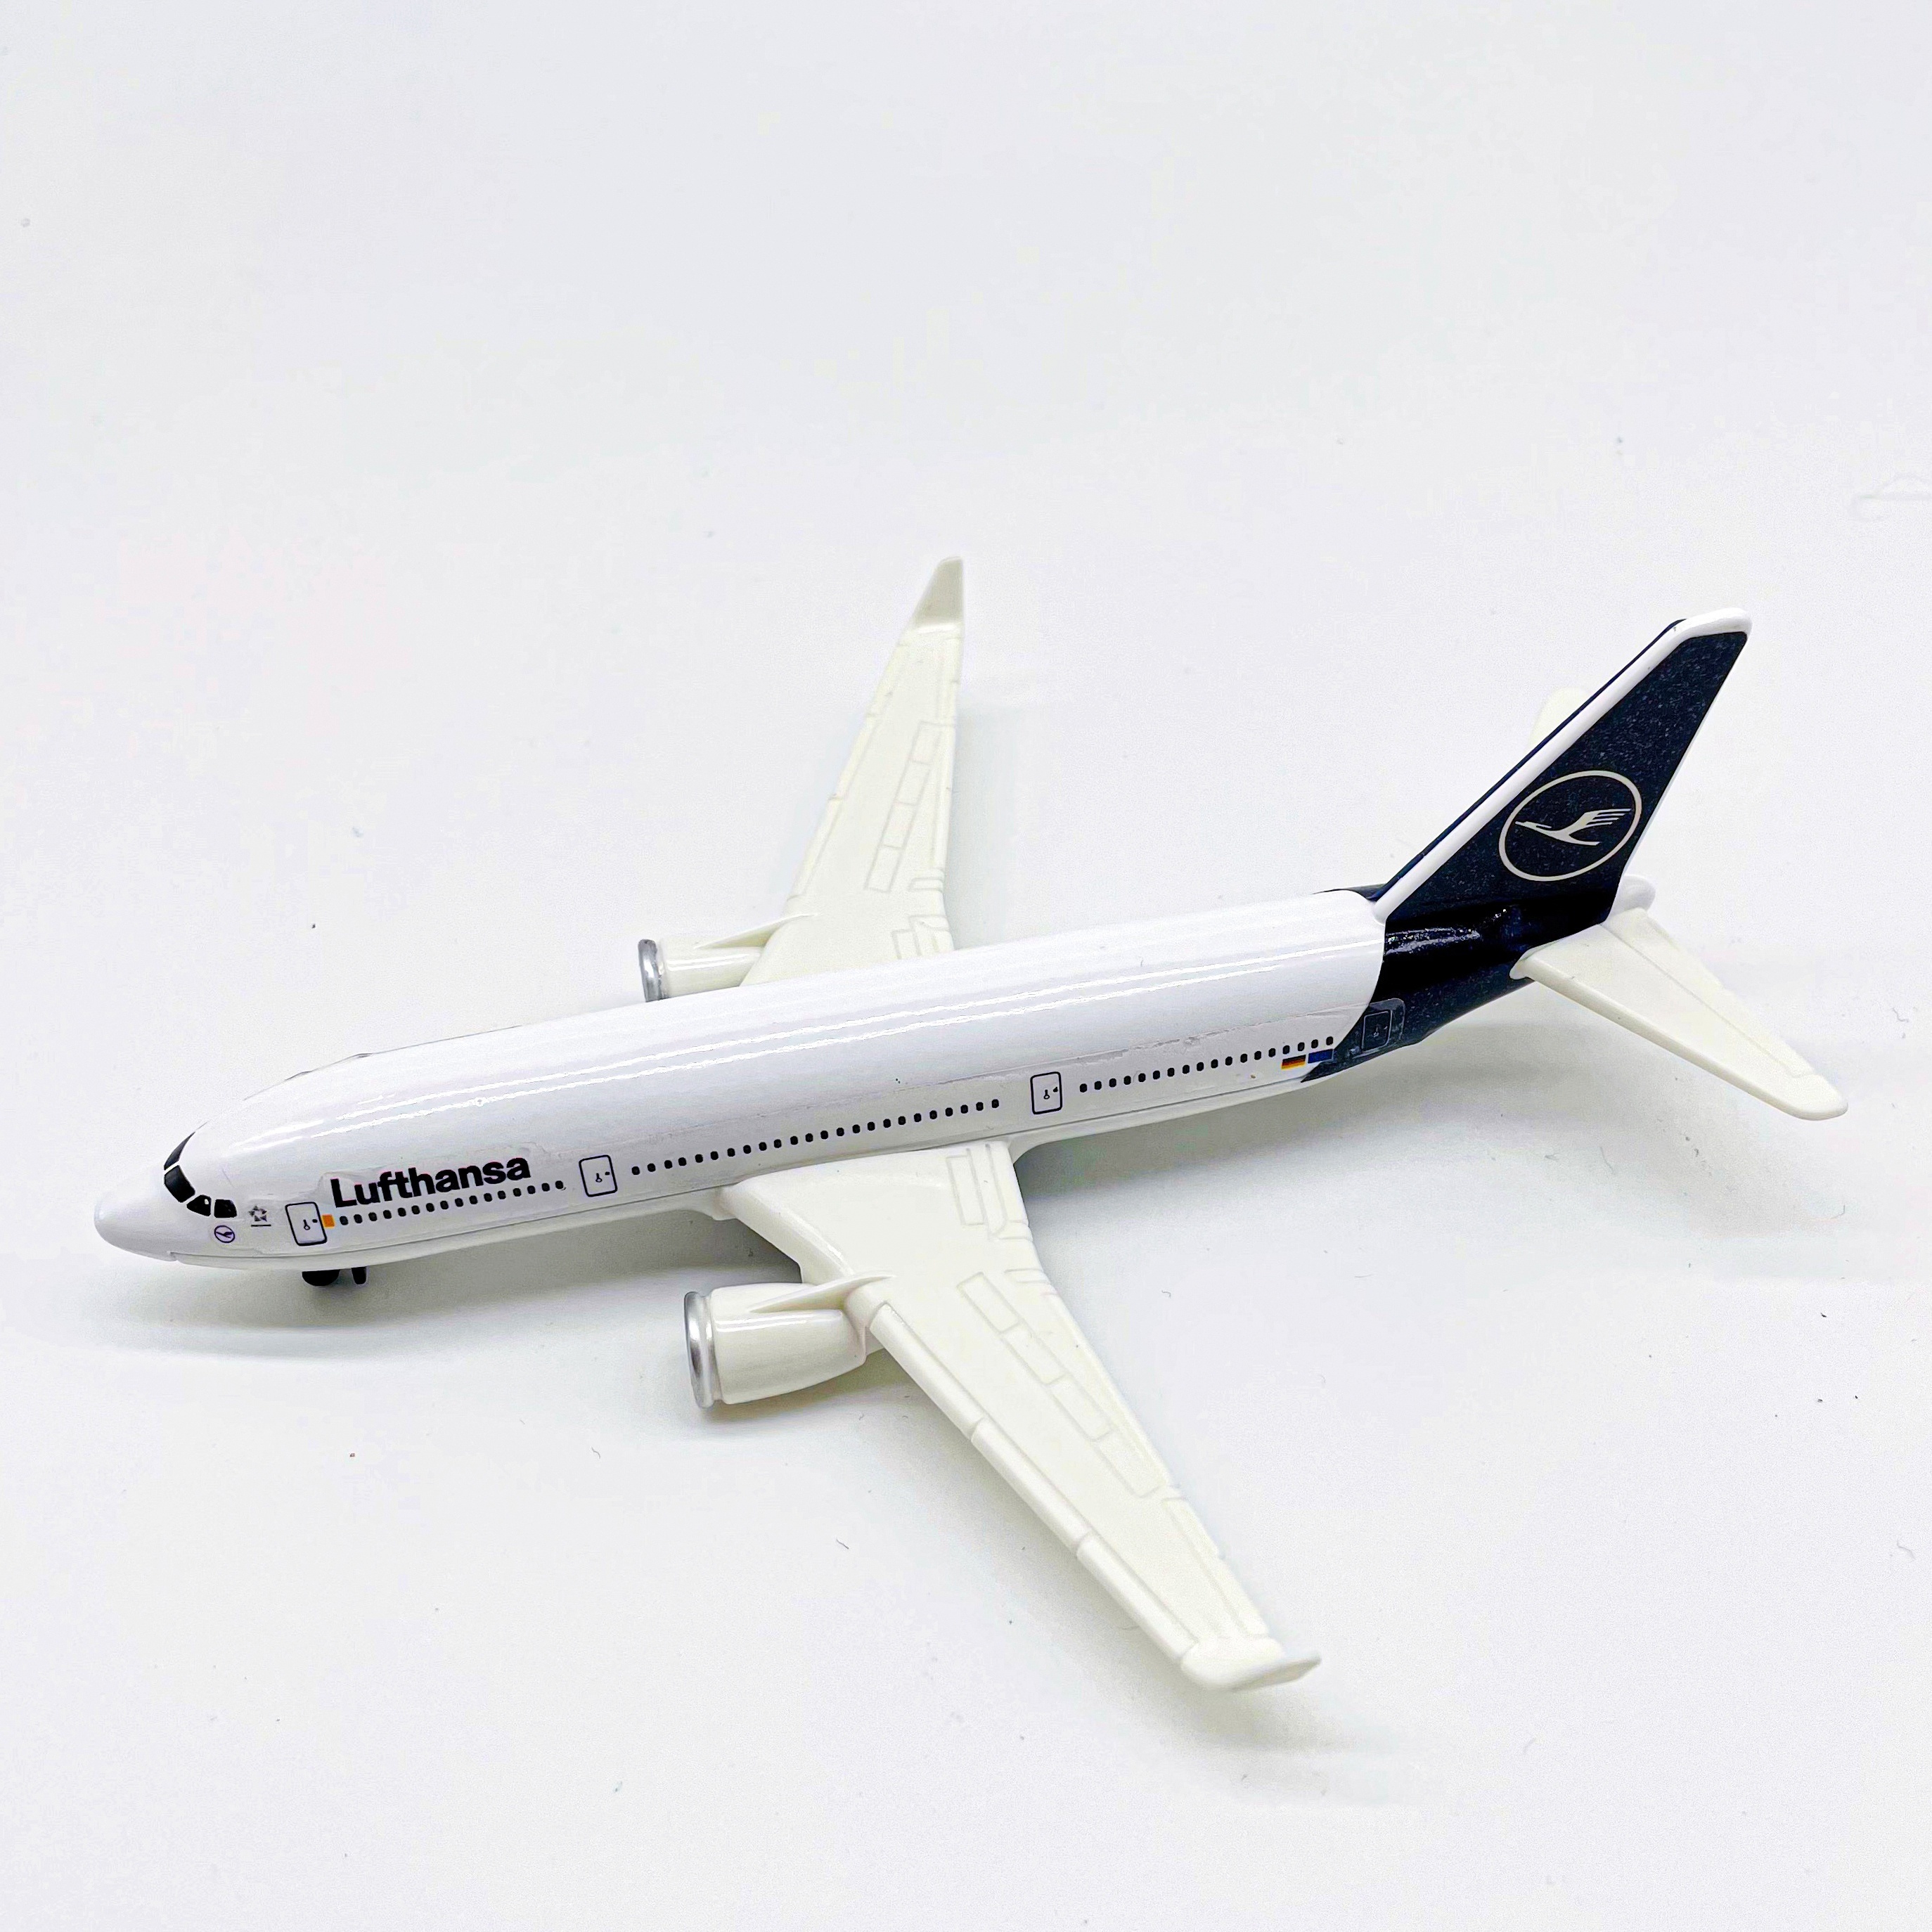 maqueta avión lufthansa - Buy Scale models of airplanes and helicopters on  todocoleccion